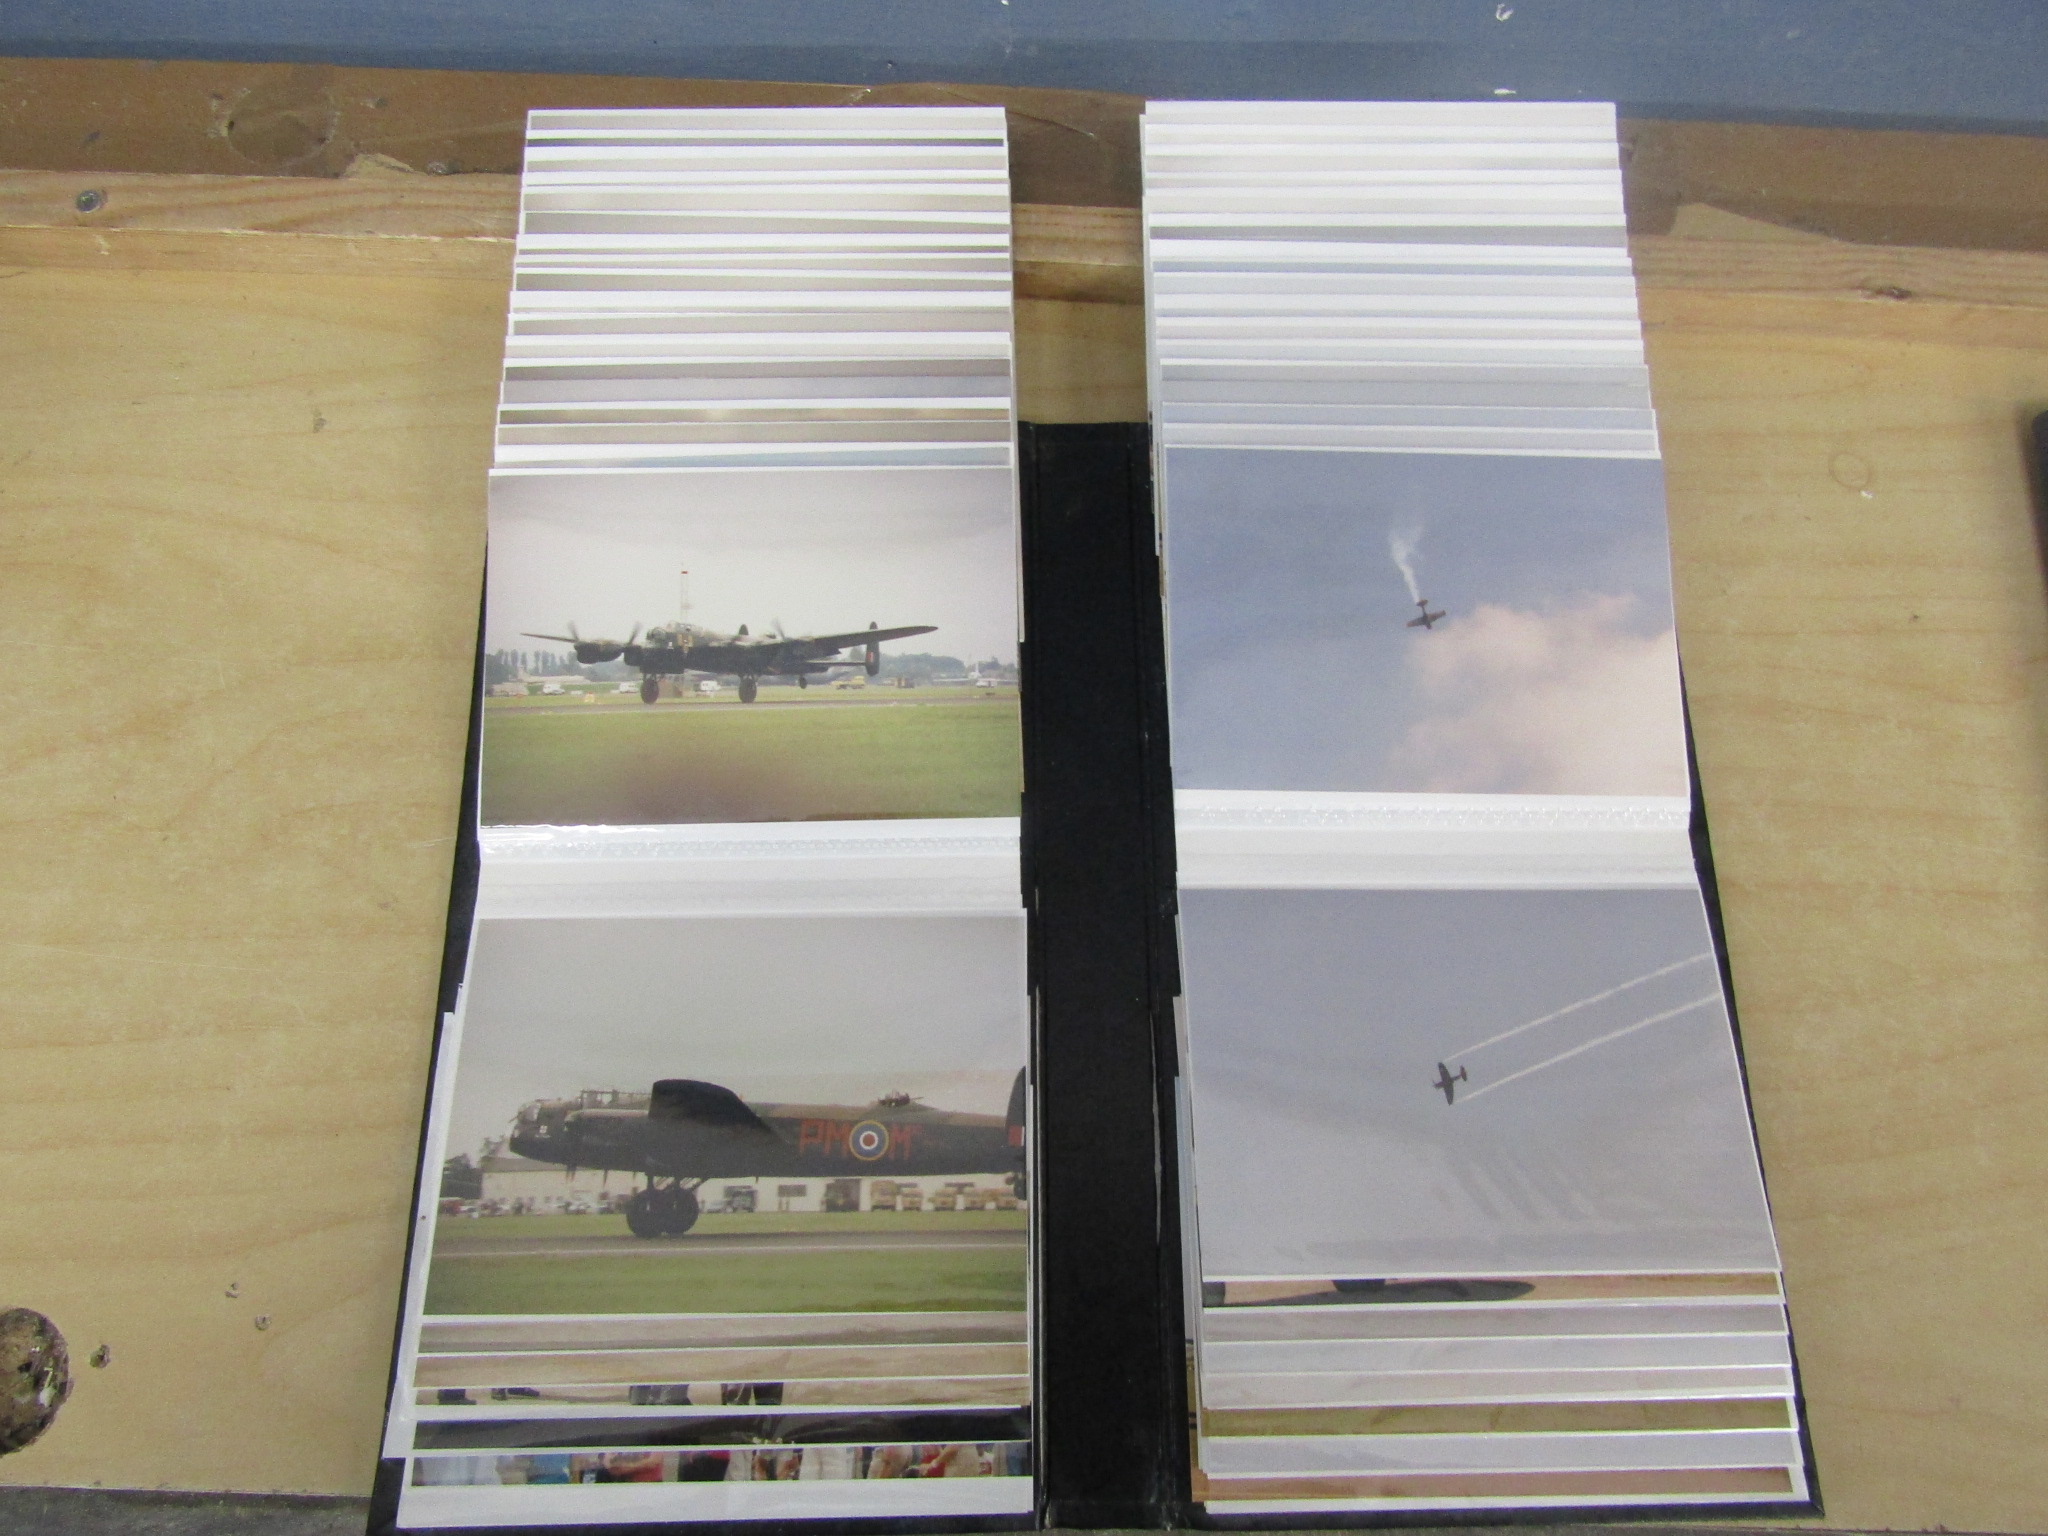 2 Photo albums, one containing vintage aircraft photo's, the other containing 1980's war re- - Image 10 of 11